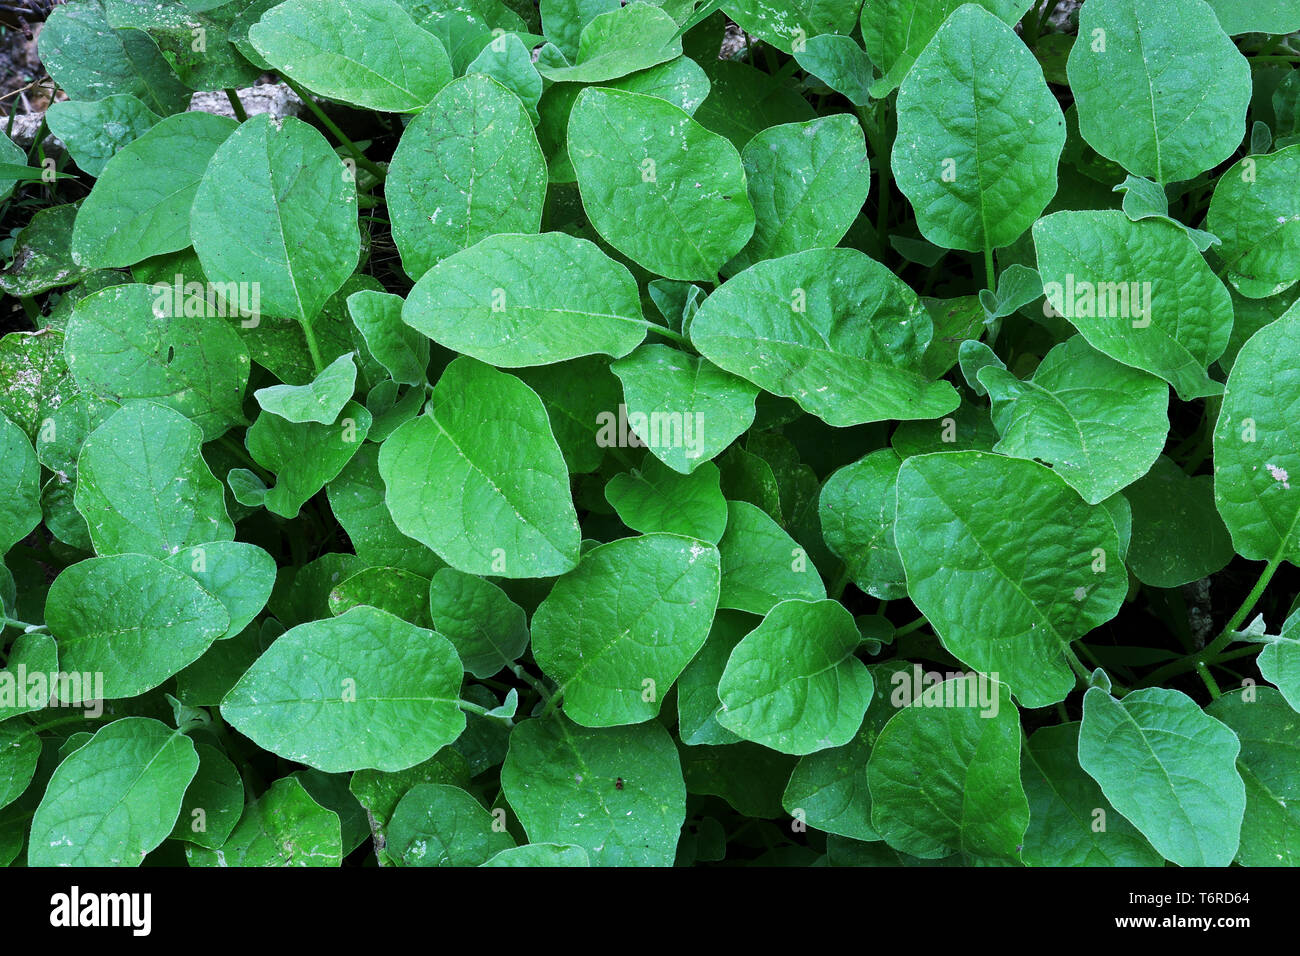 eggplant Leaves, small green leaves, image background. High resolution image gallery. Stock Photo